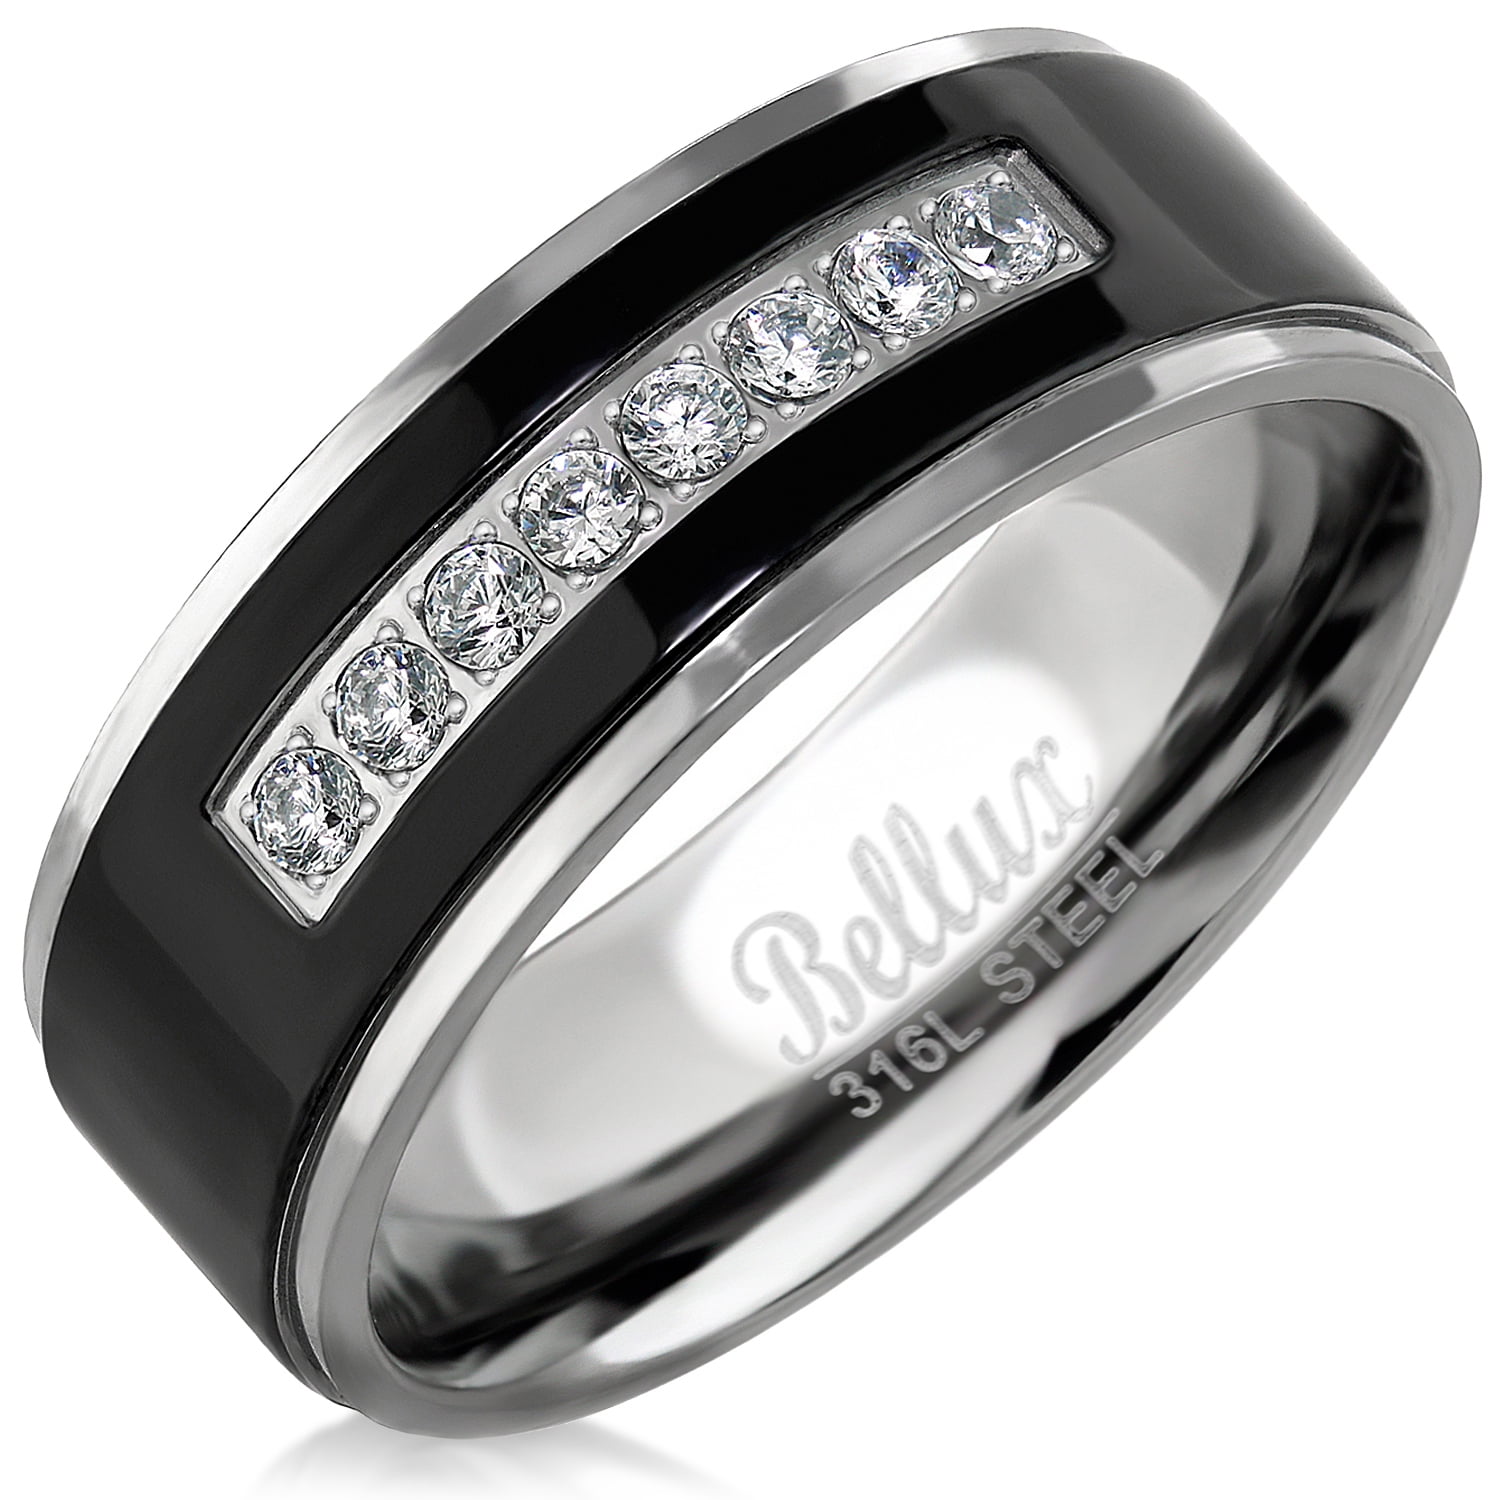 Bellux Style - Mens Wedding Bands Stainless Steel Promise Rings for Him